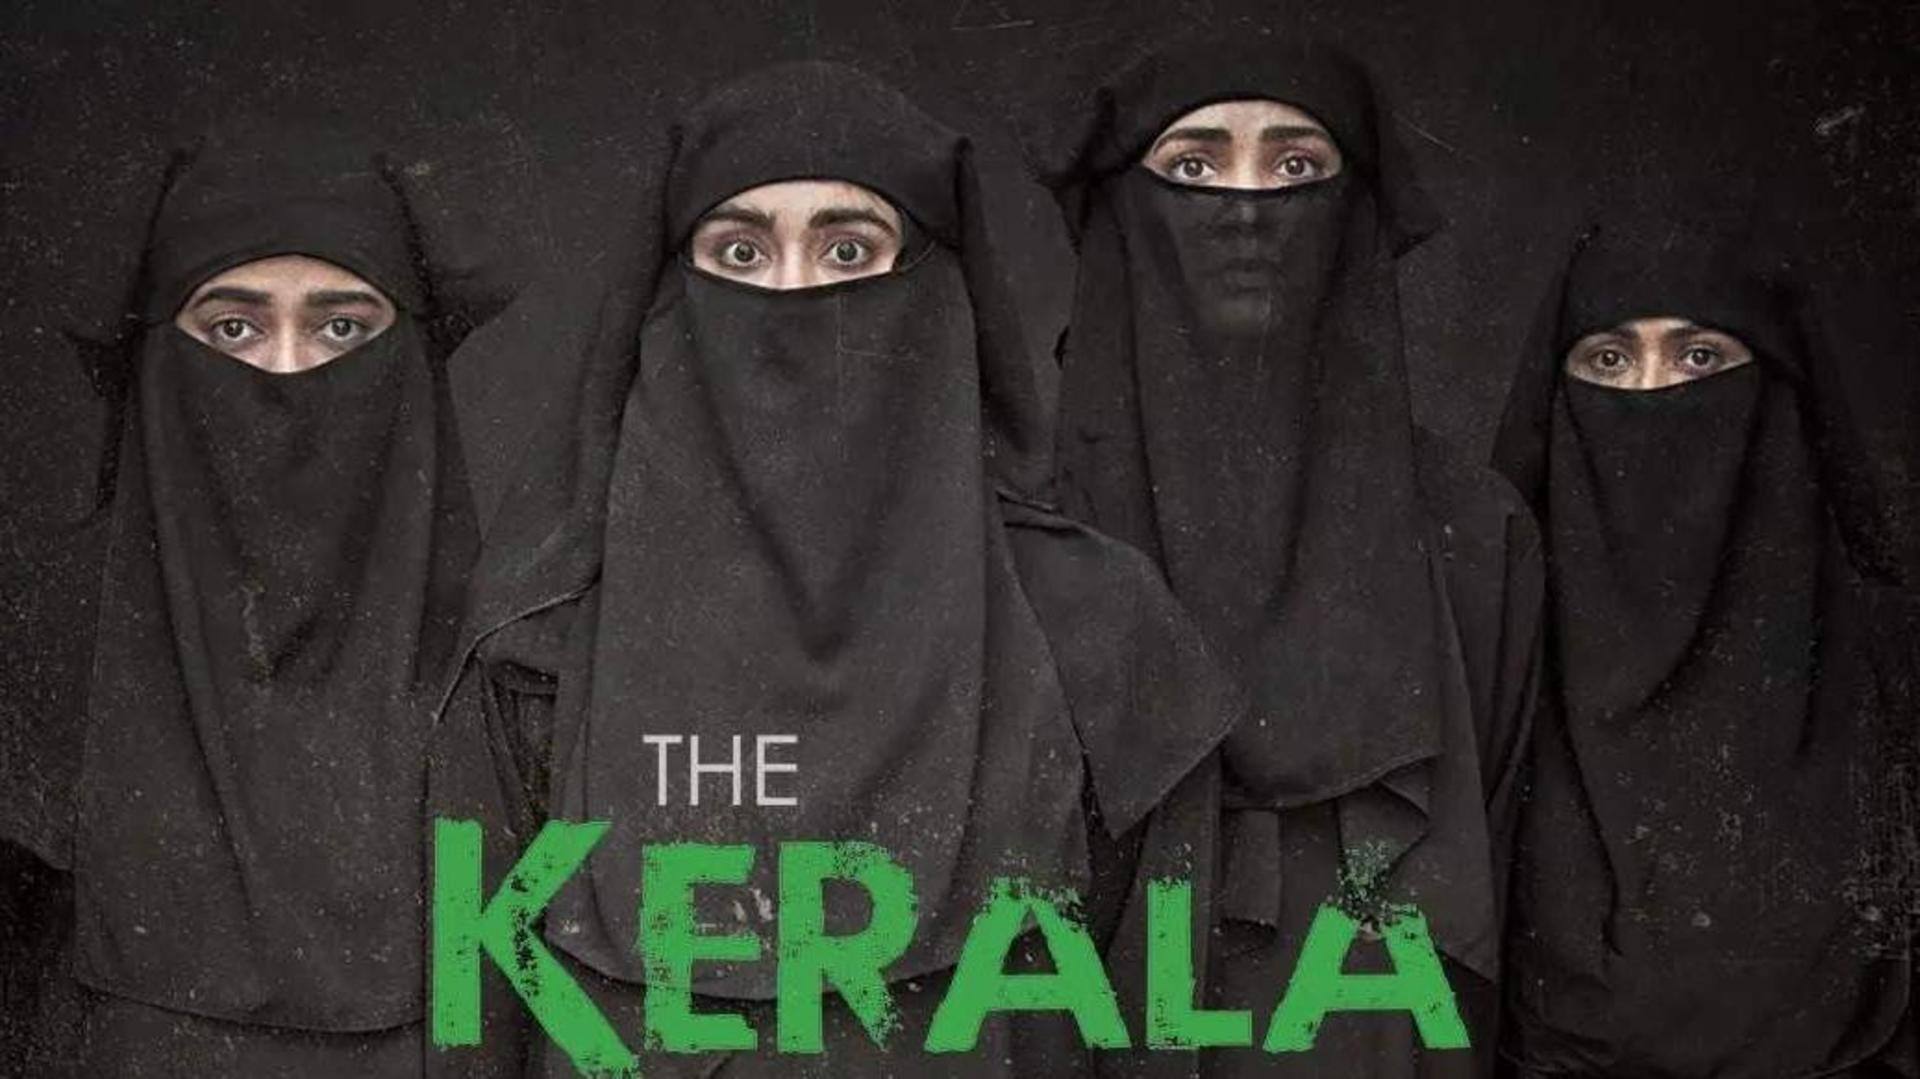 #BoxOfficeCollection: 'The Kerala Story' is steady in Week 4